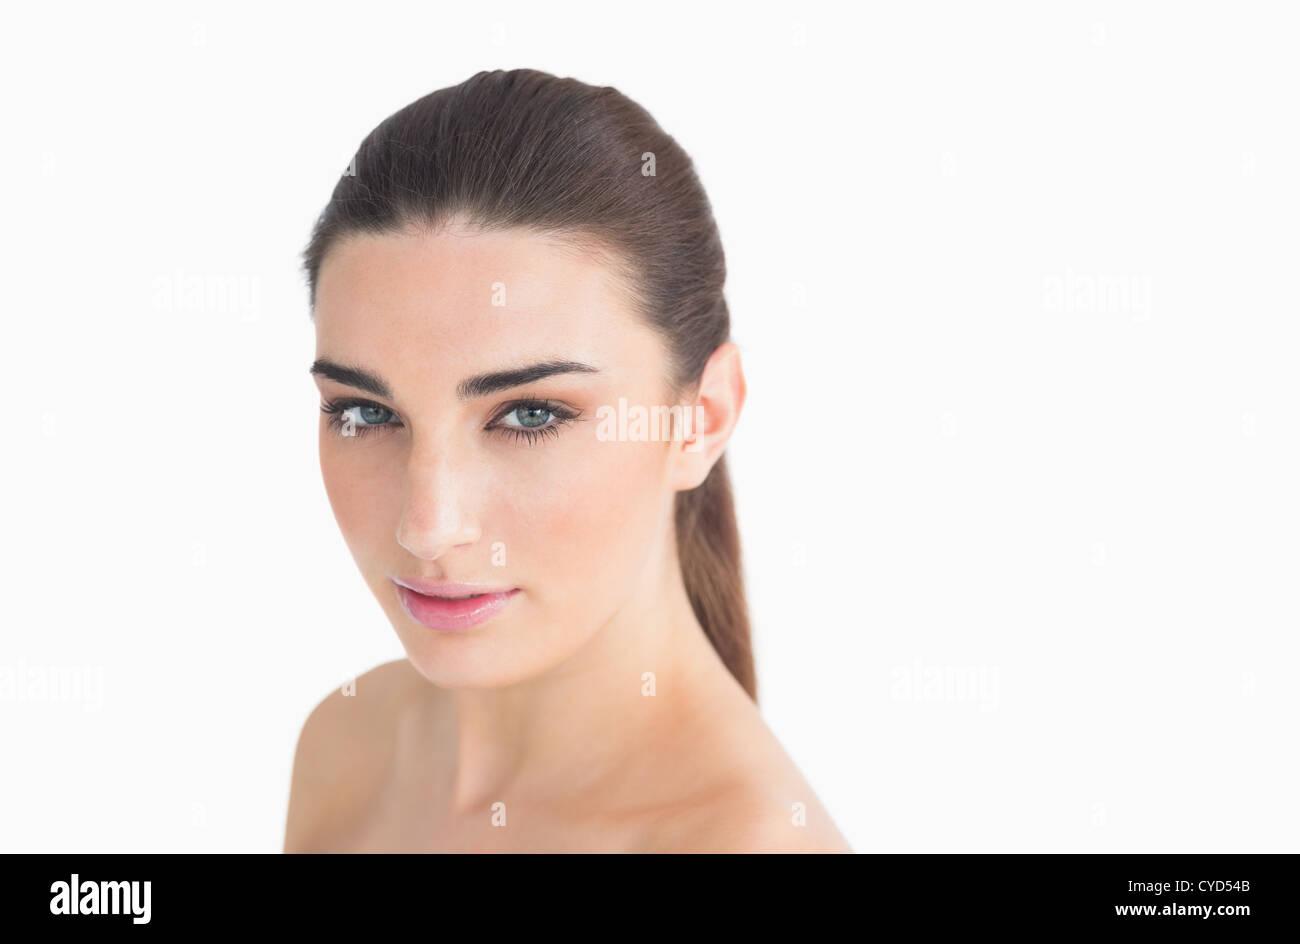 Brunette looking natural Stock Photo